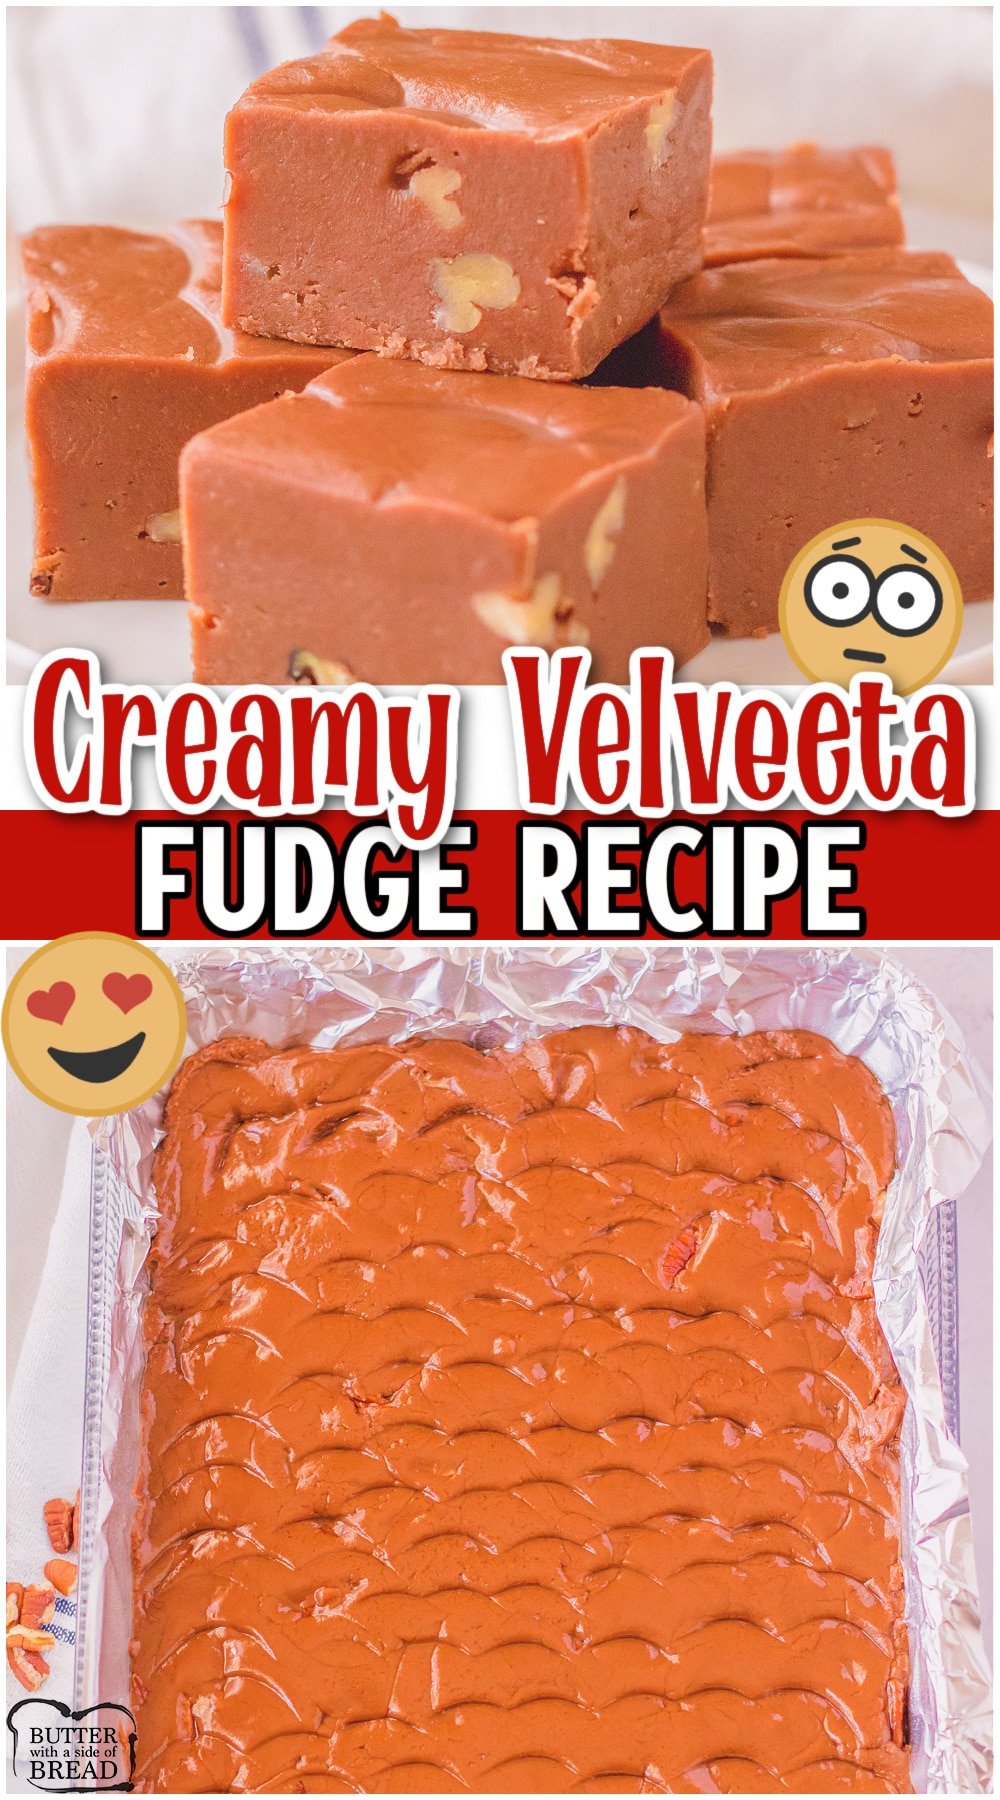 Creamy Velveeta Fudge recipe with amazing flavor & smooth texture! Made with velveeta! Yep! It's easy to make and combines two favorite ingredients: chocolate and cheese. What's not to love?